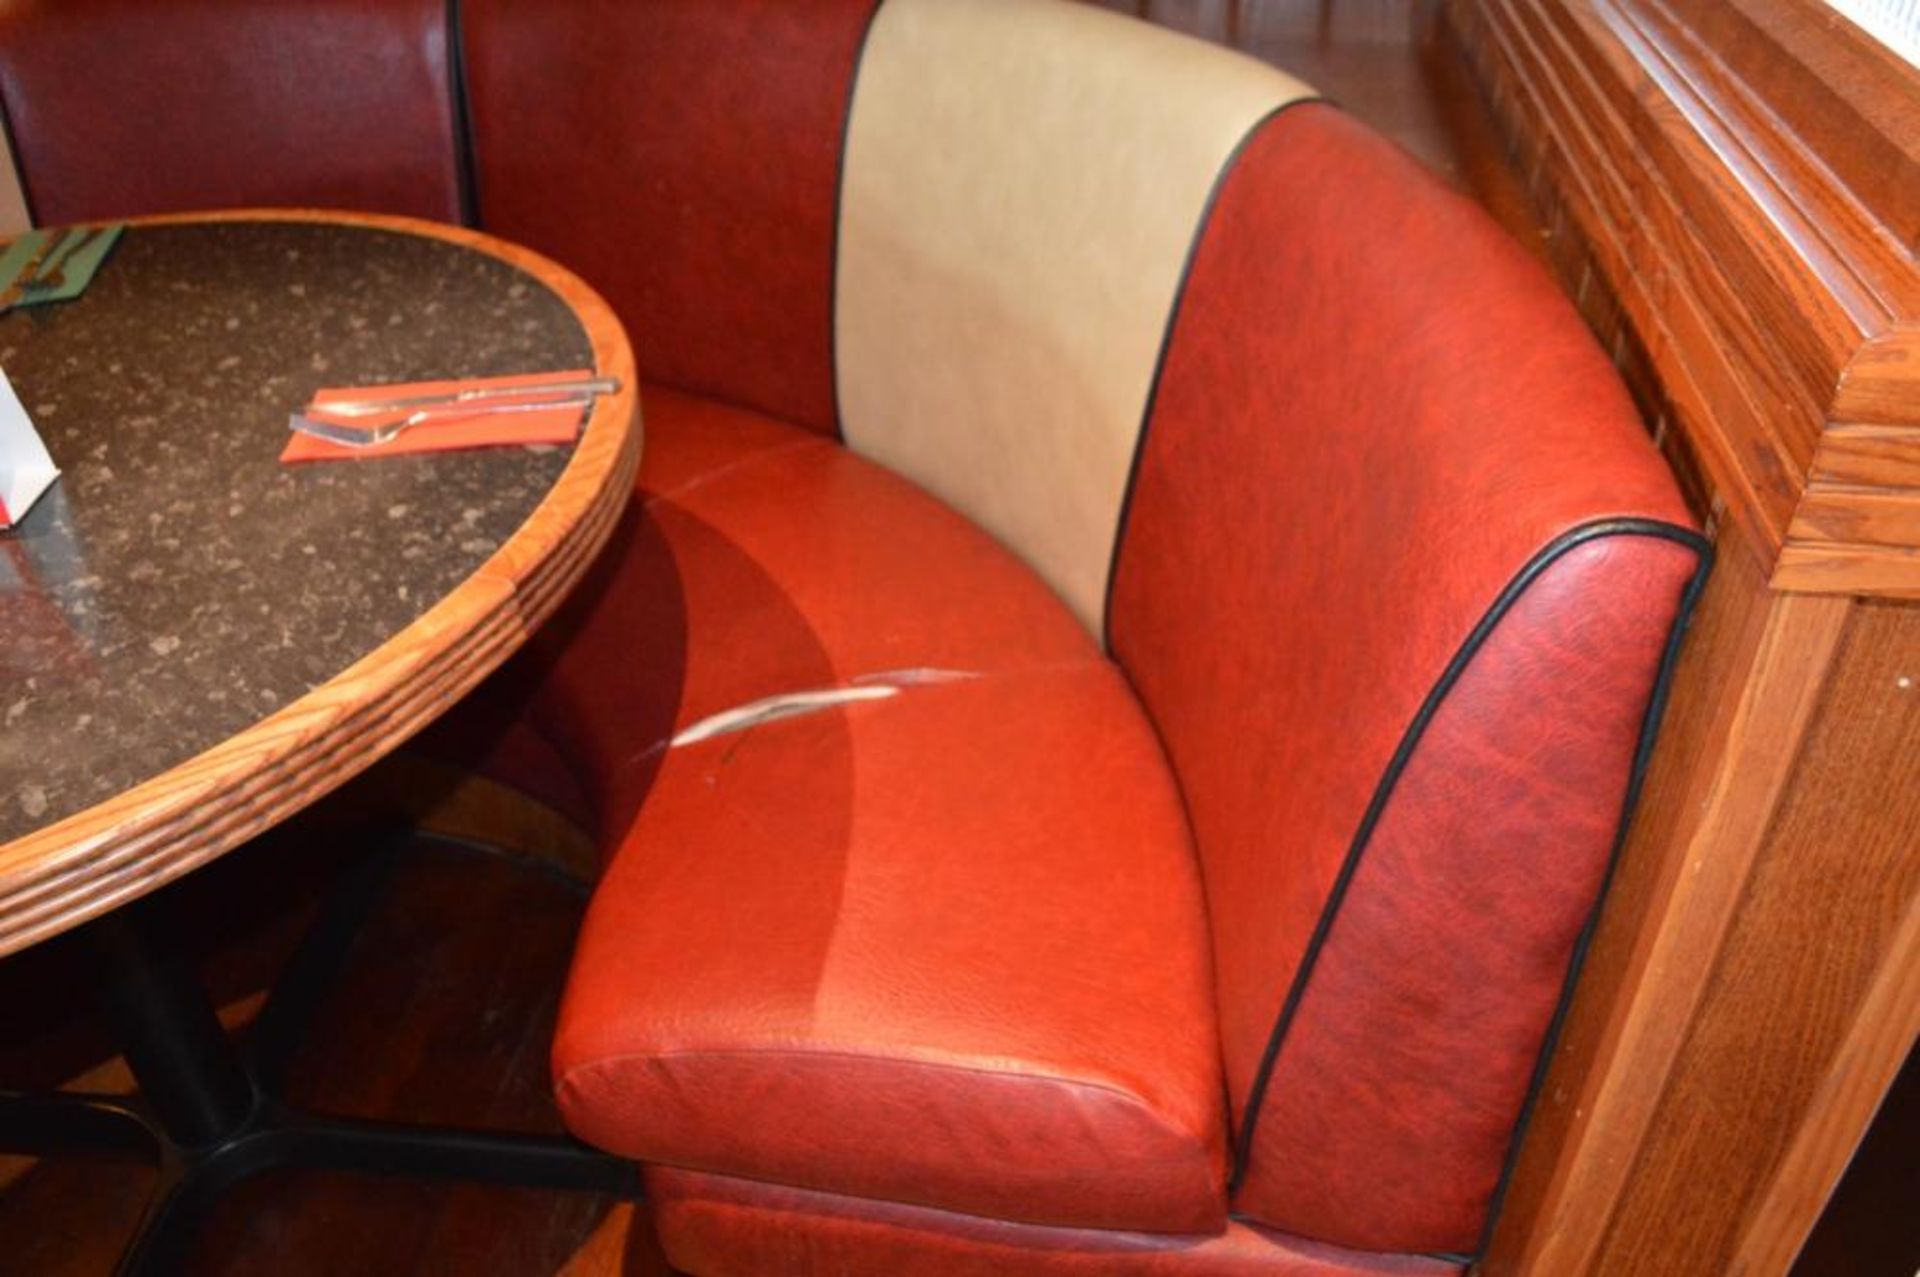 1 x Seating Booth in a 1950's Retro American Diner Design - Upholstered With Red and Cream Faux Leat - Image 3 of 9